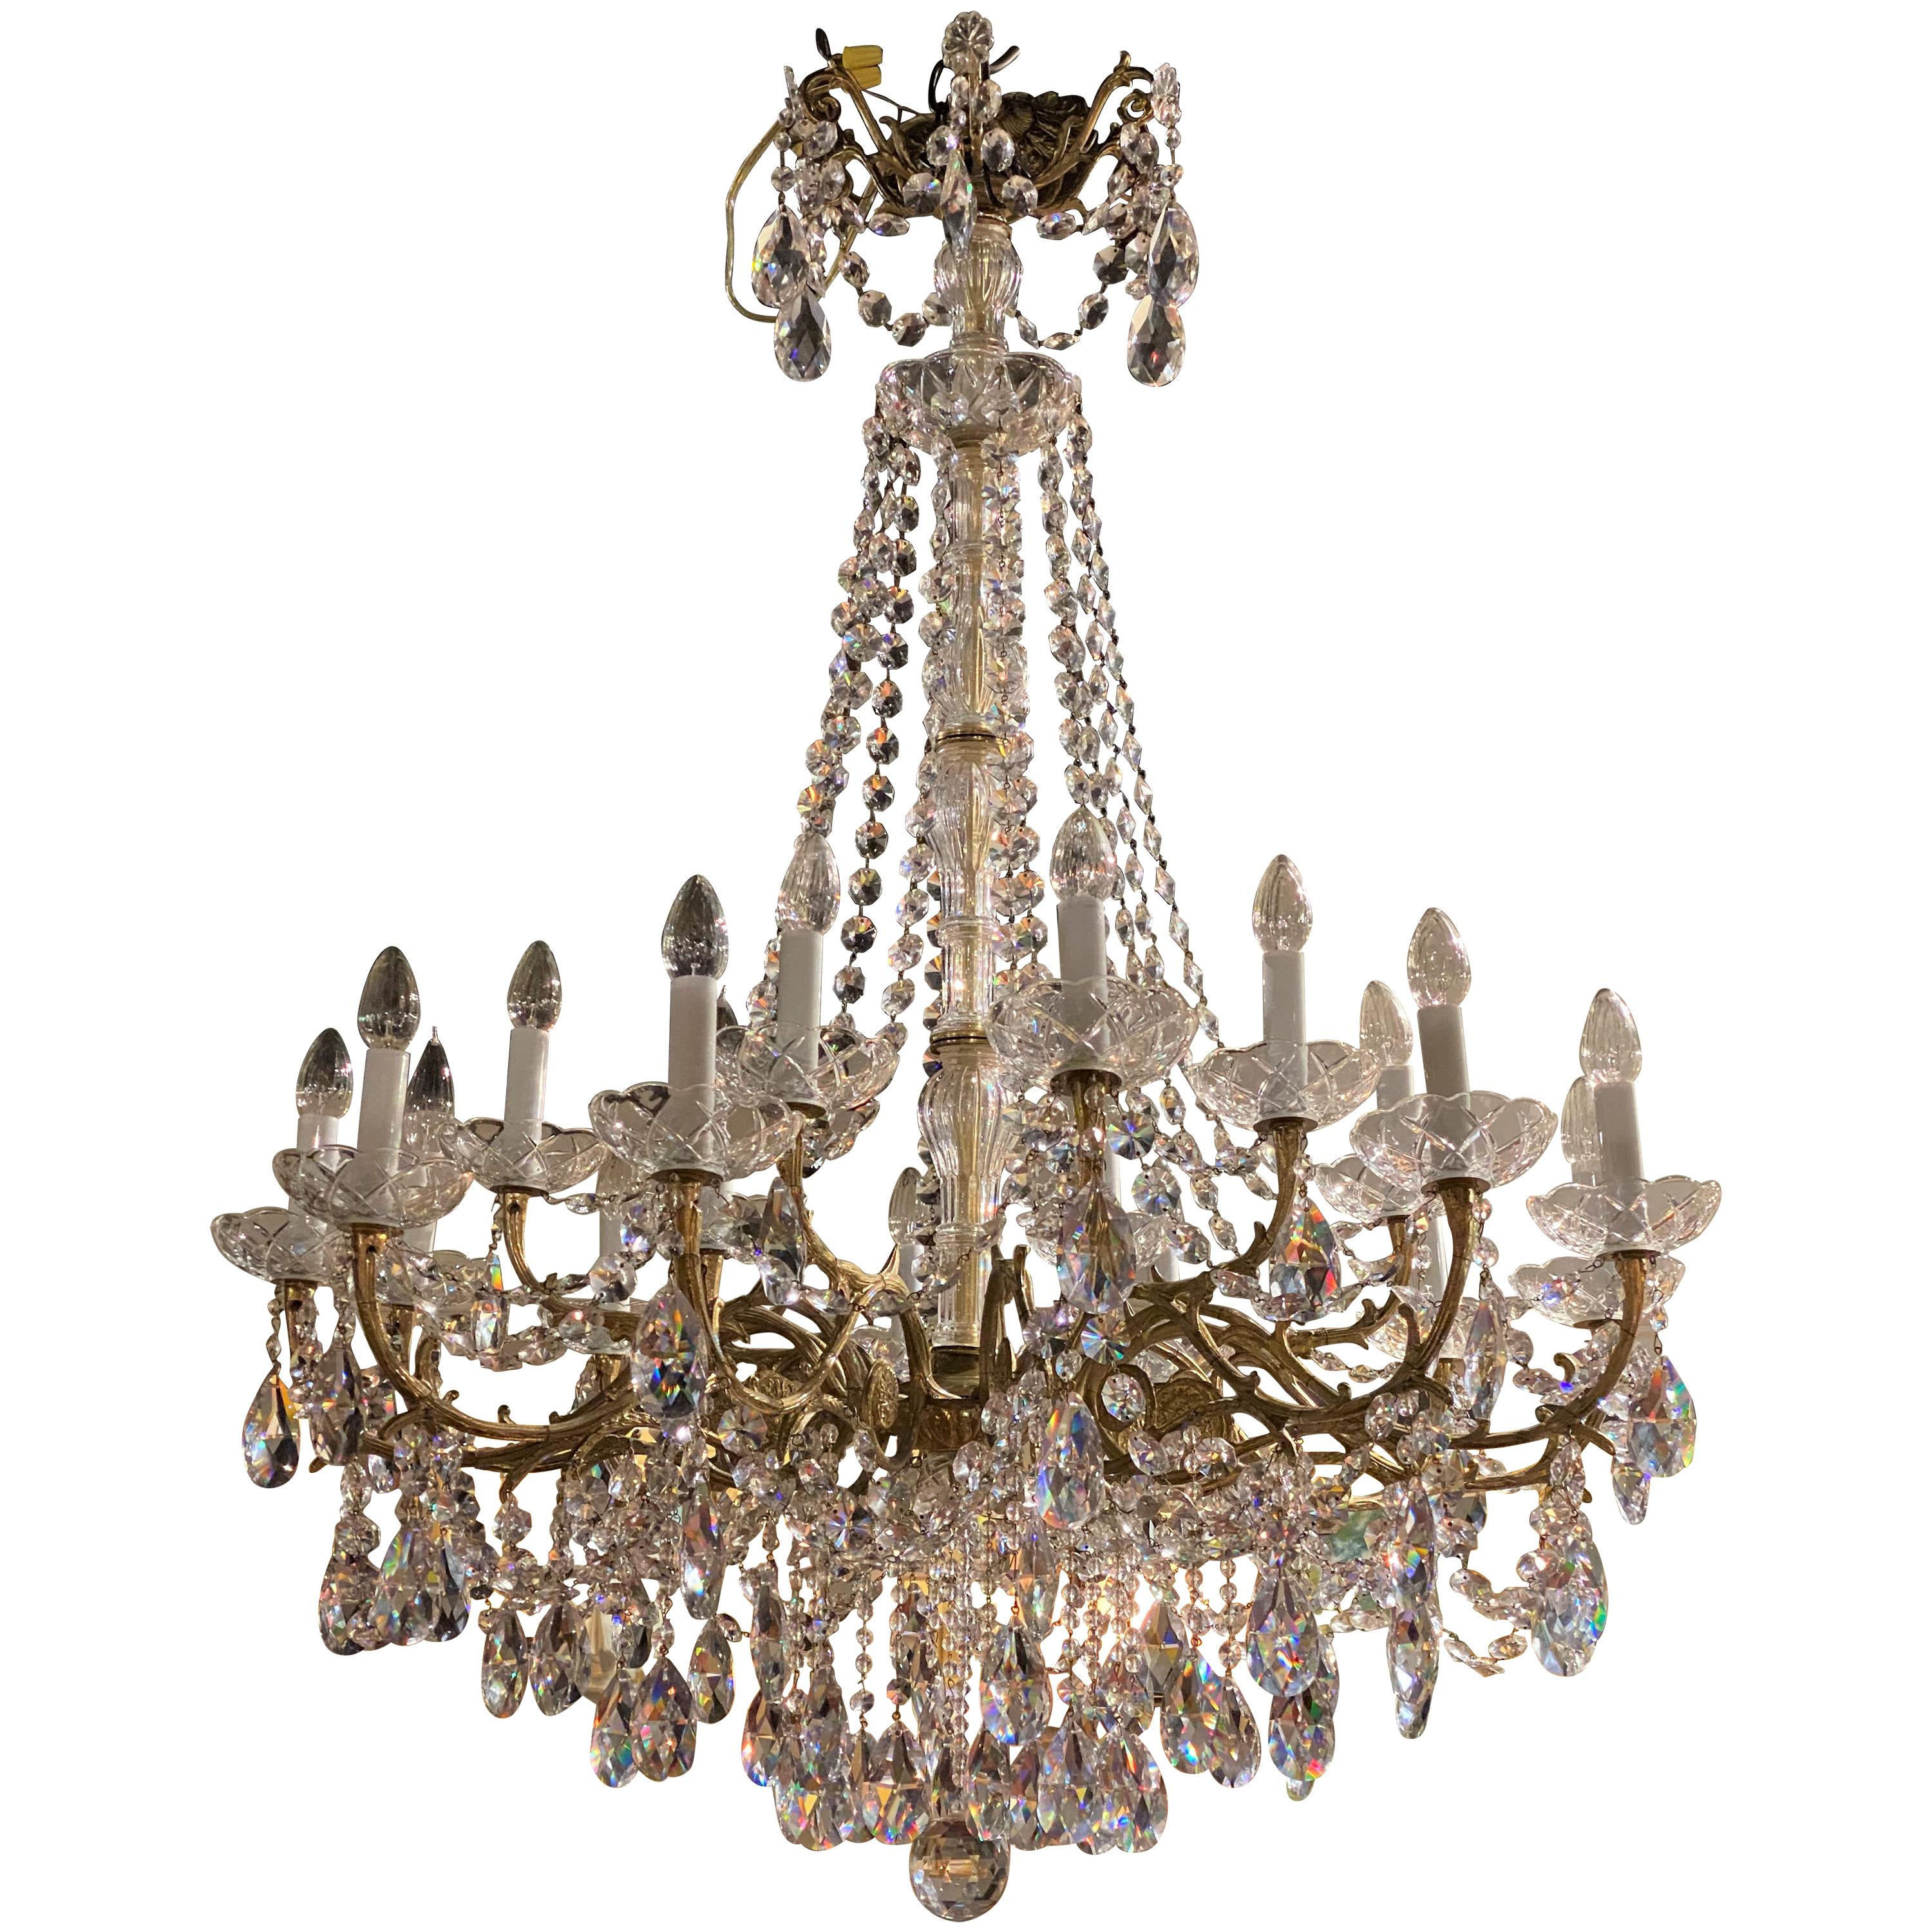 Exquisite 18 Light French Style Crystal & Brass Chandelier